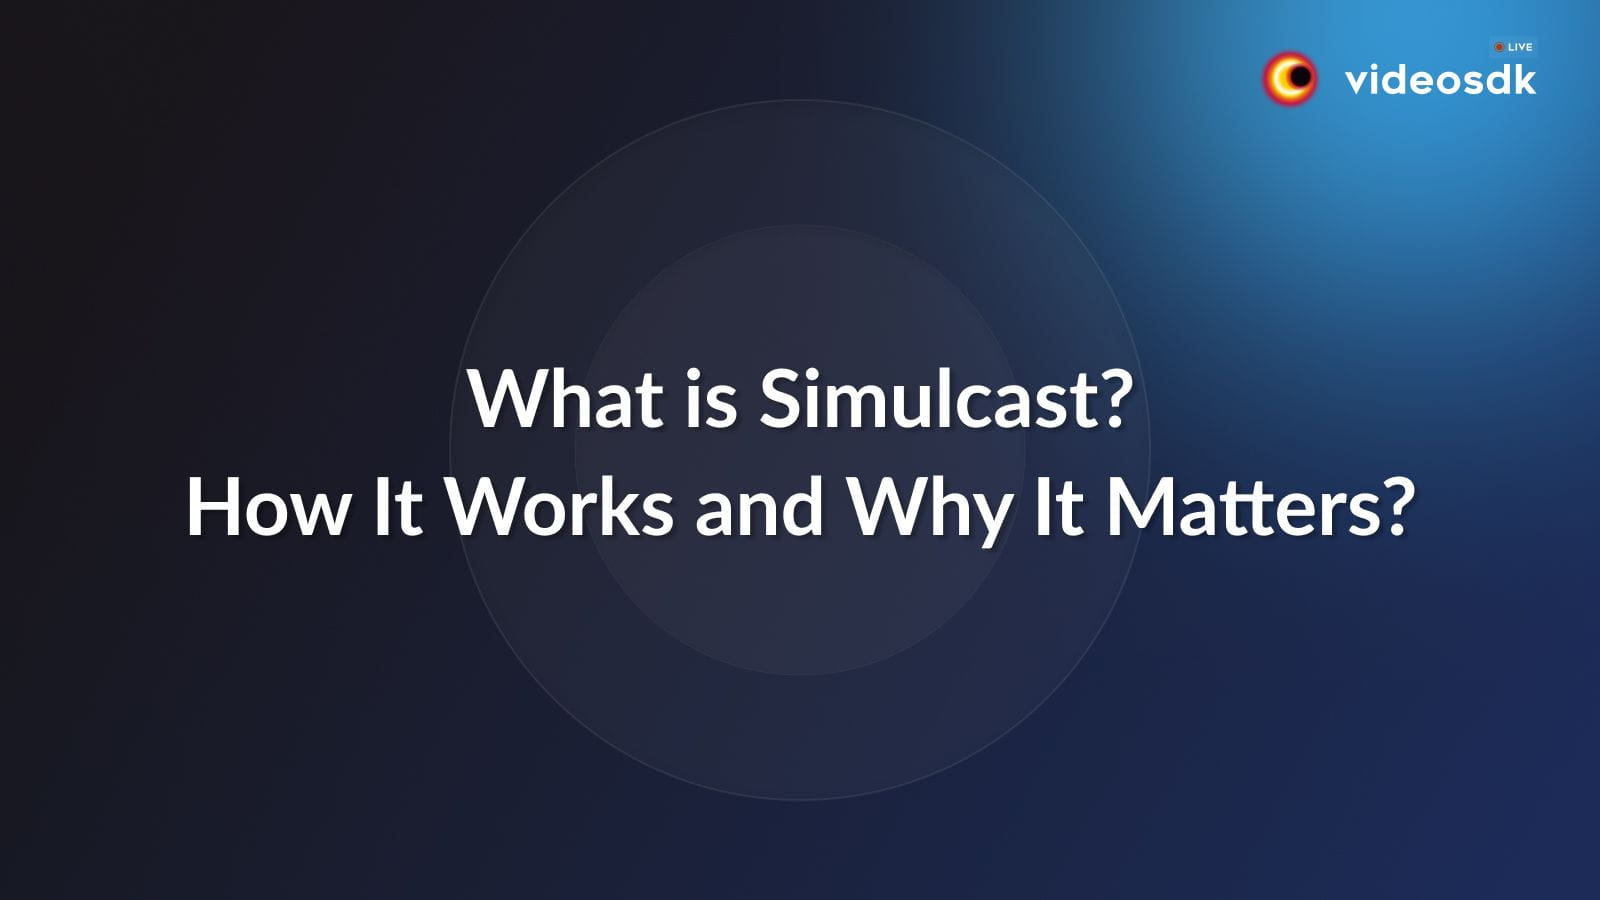 What is Simulcast? How Simulcast Works?